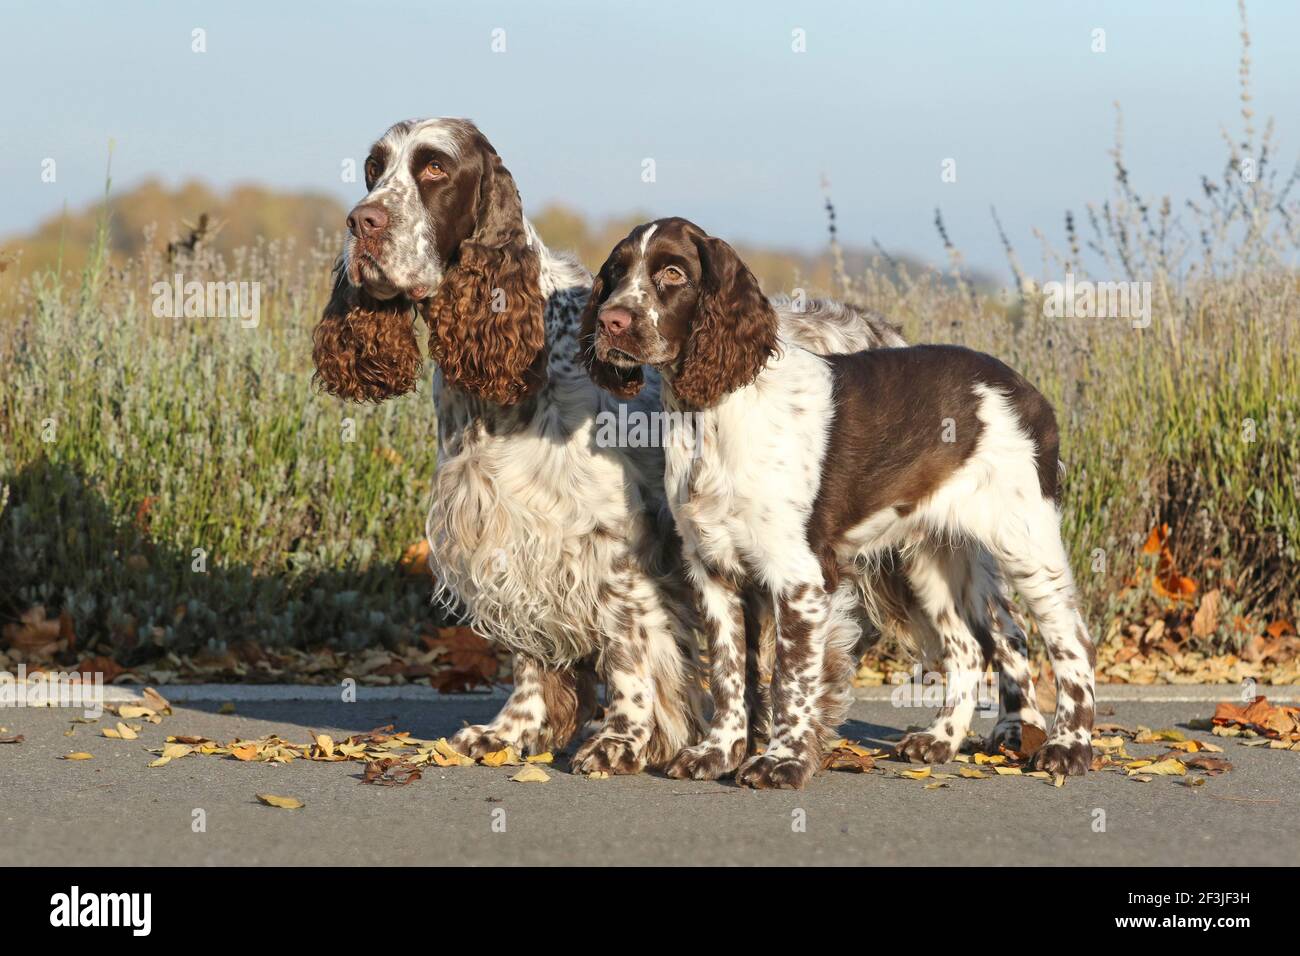 English Springer Spaniel. Two males (right 6 years old, left 17 weeks old) standing next to each other. Germany Stock Photo